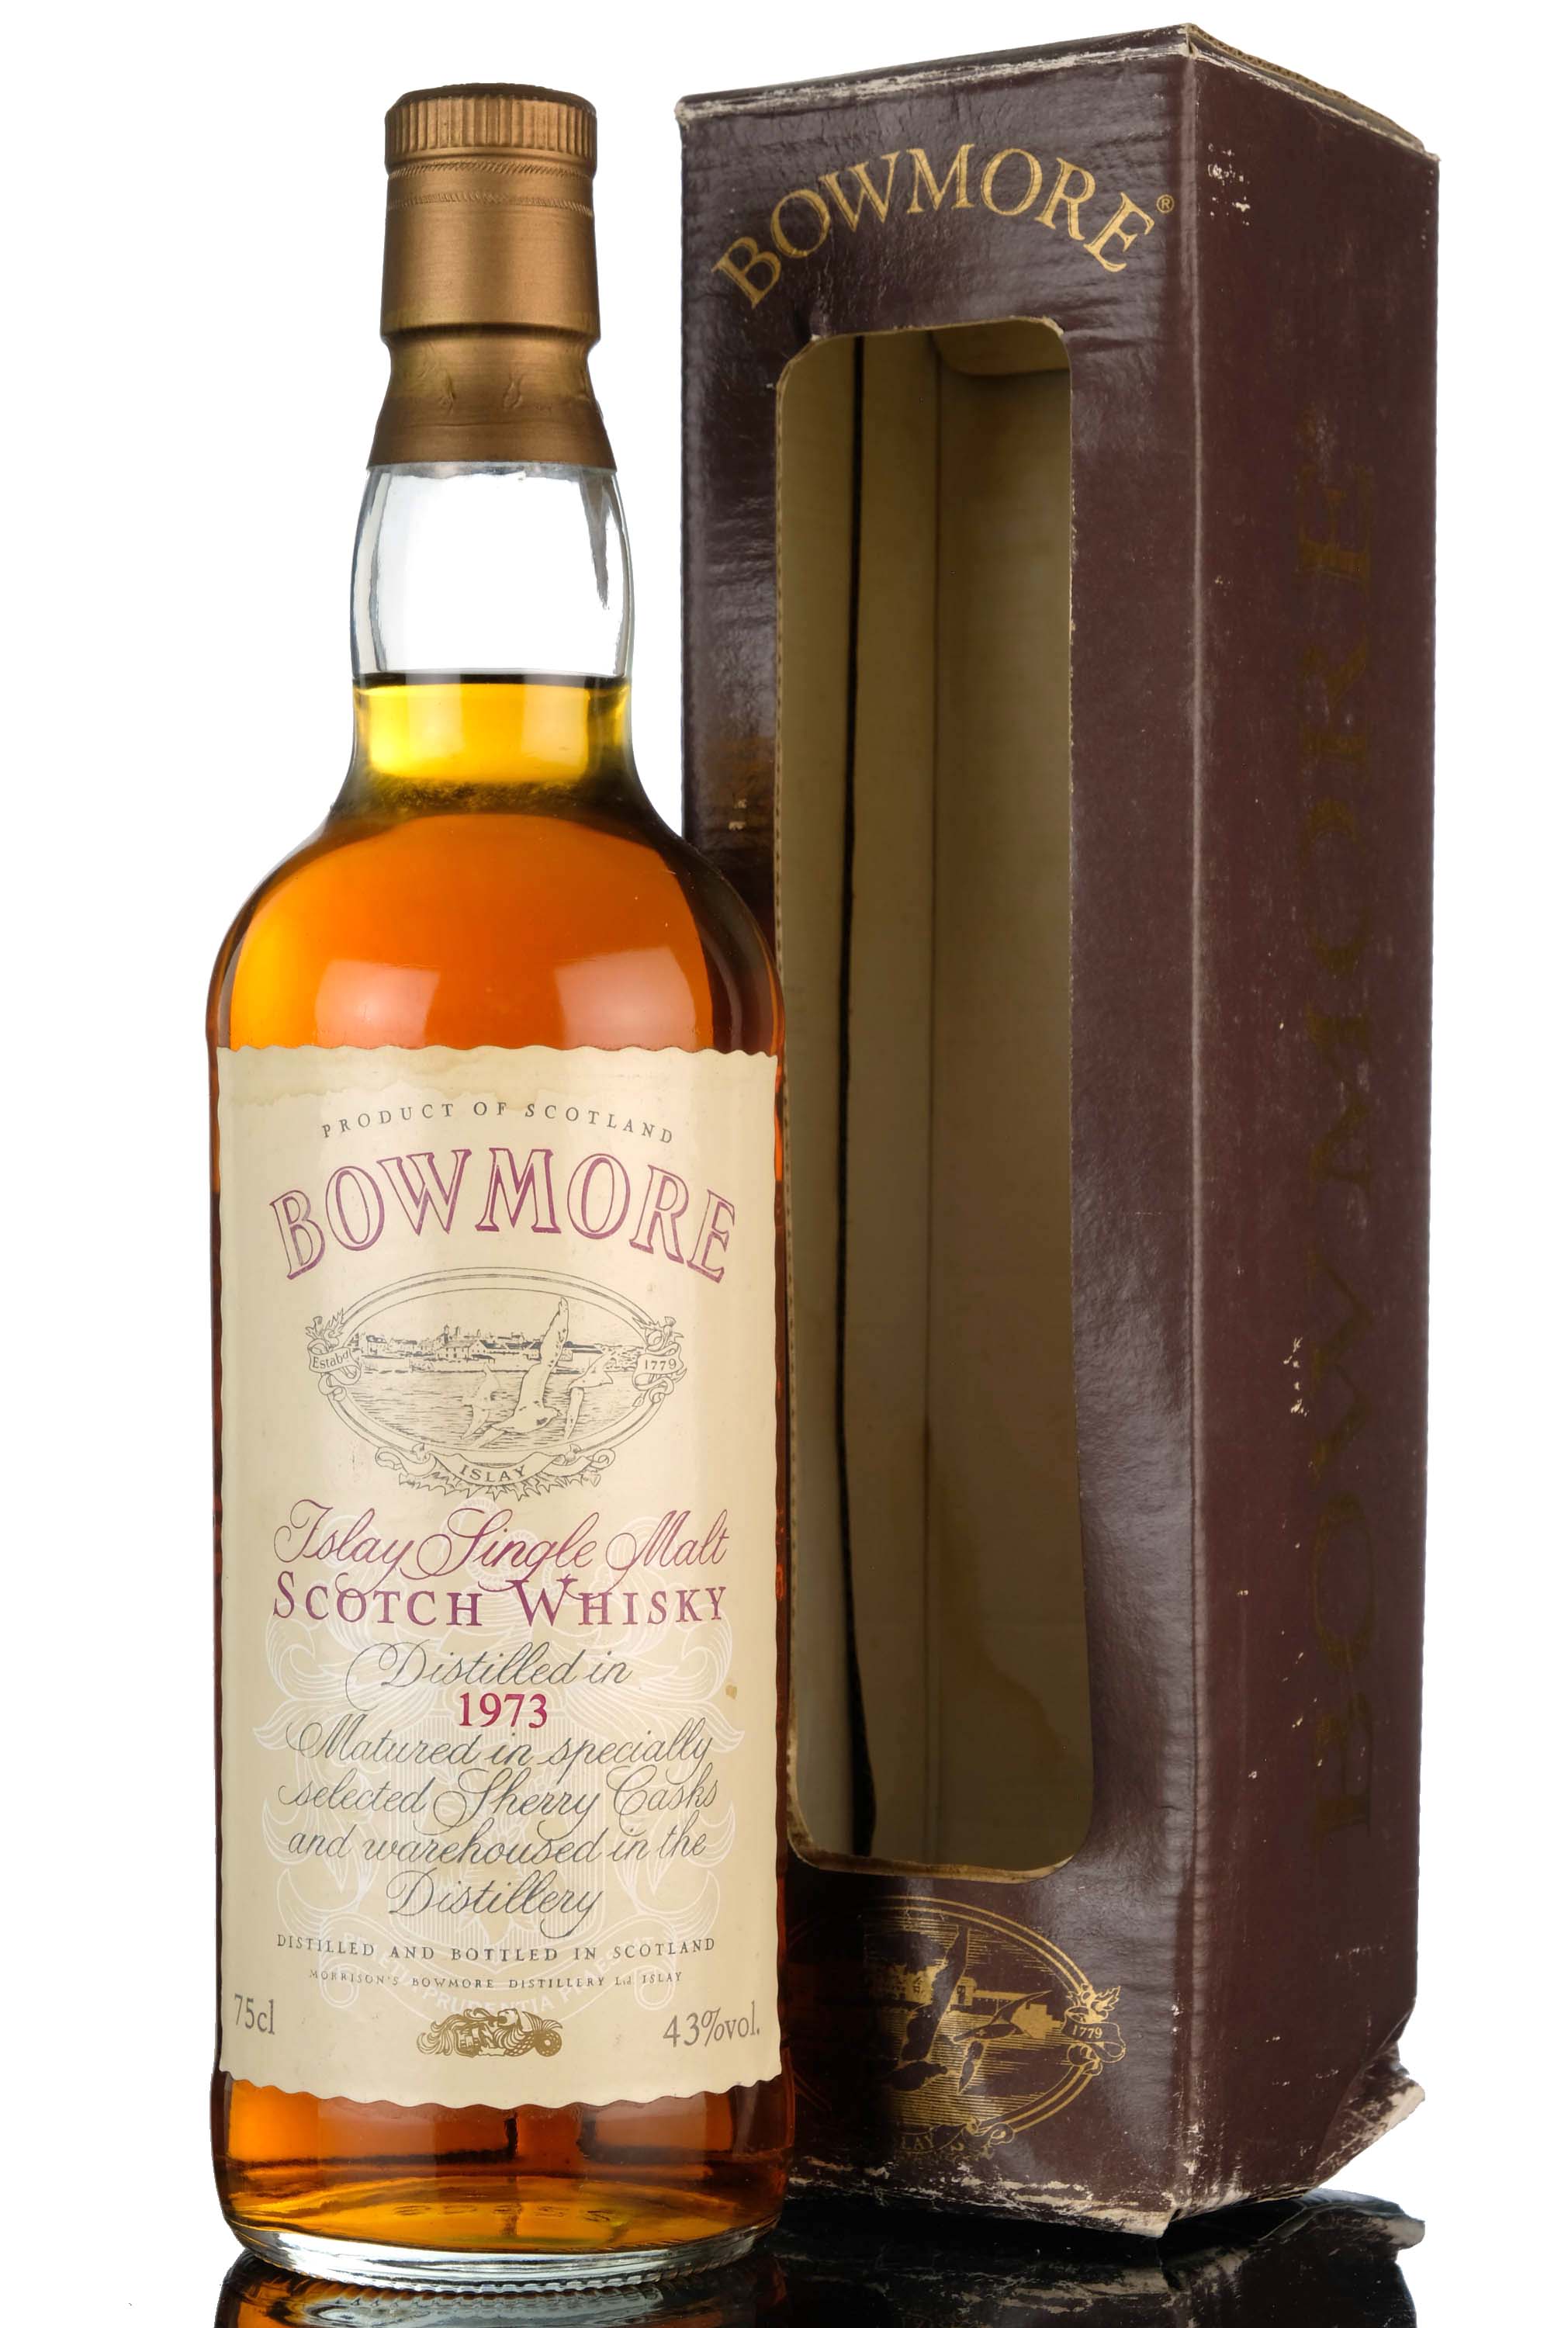 Bowmore 1973 - Sherry Cask - Vintage Label - Butts 5173 & 5174